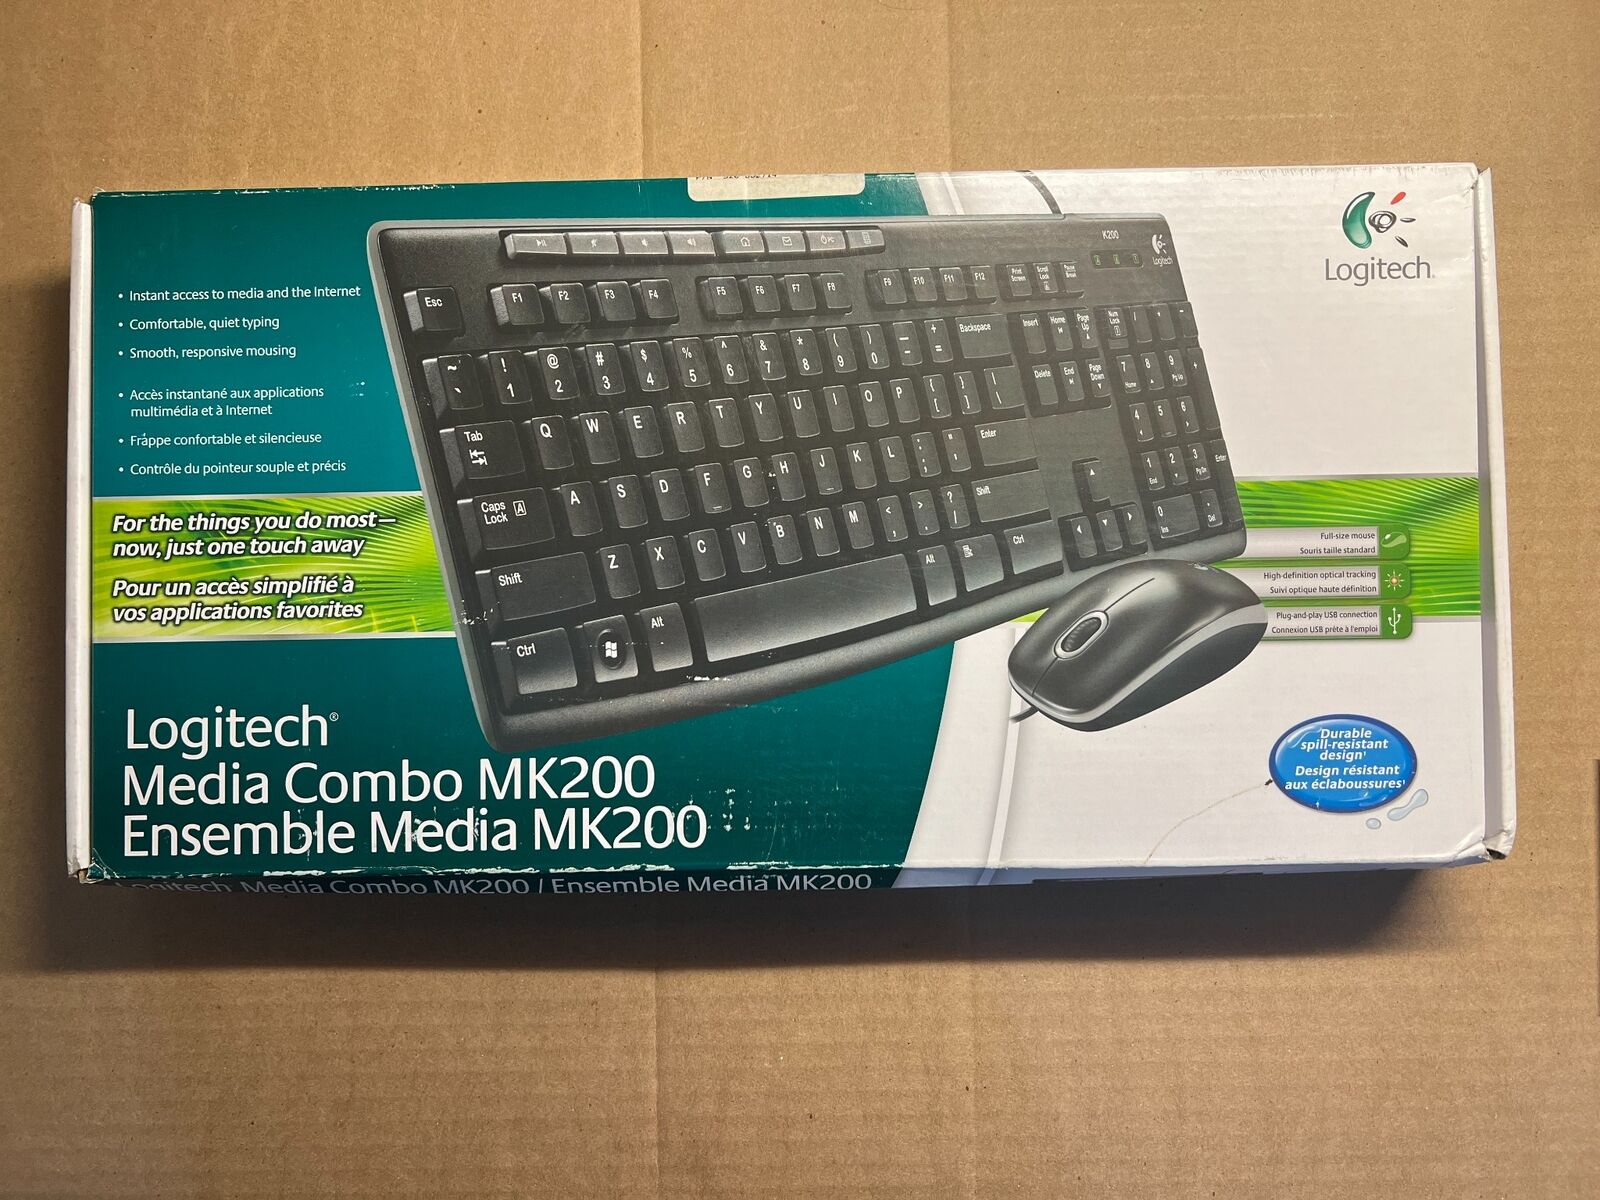 LOGITECH MEDIA COMBO MK200 FULL-SIZE KEYBOARD AND HIGH-DEFINITION OPTICAL MOUSE